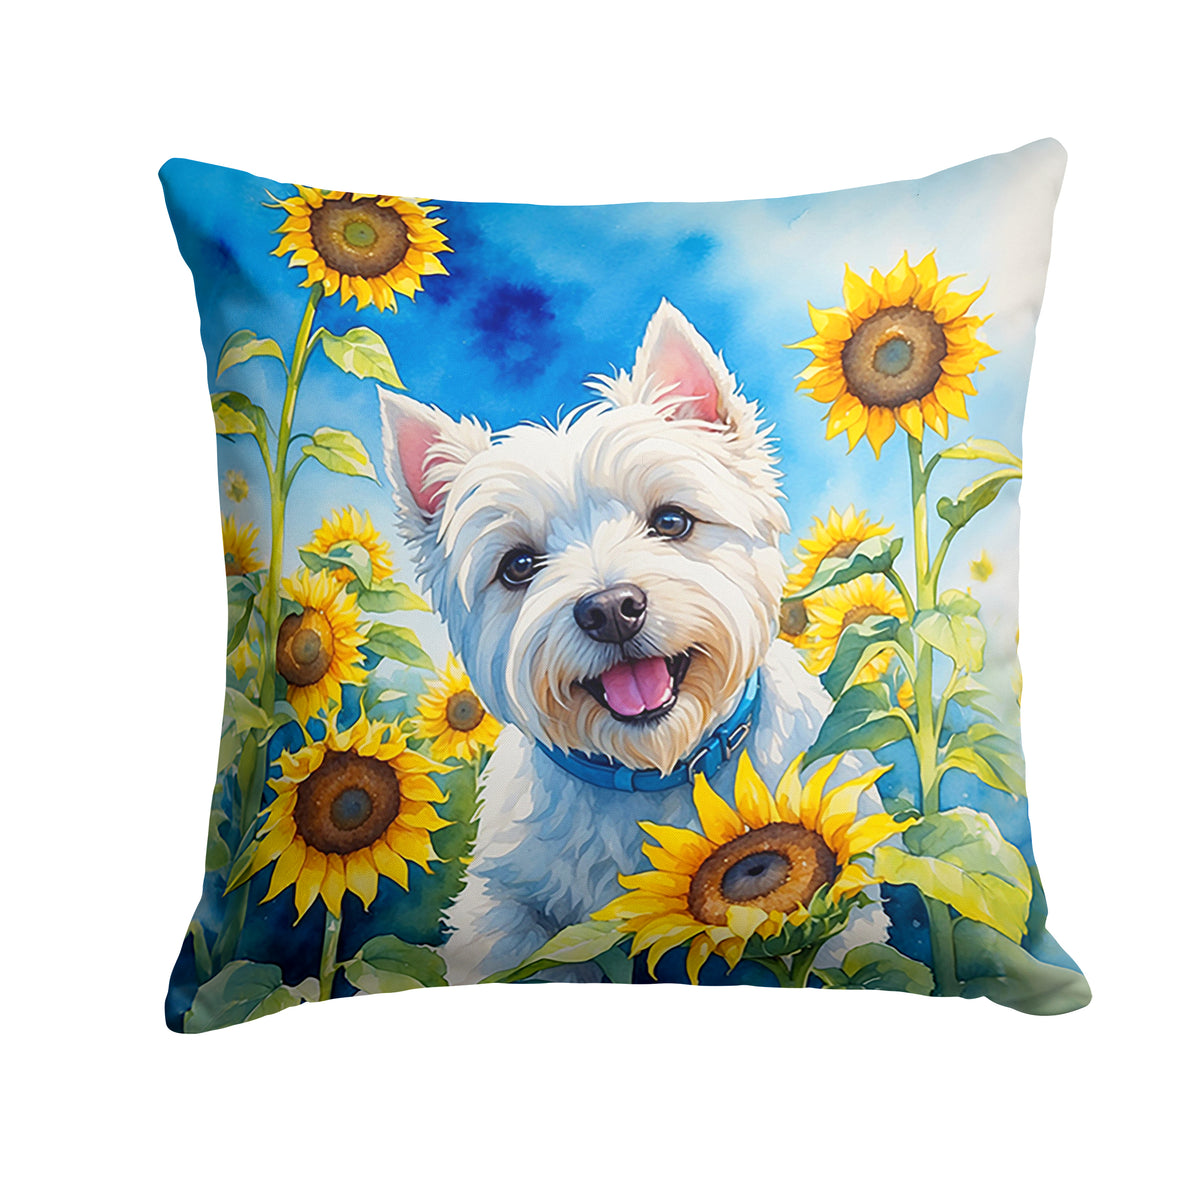 Buy this Westie in Sunflowers Throw Pillow